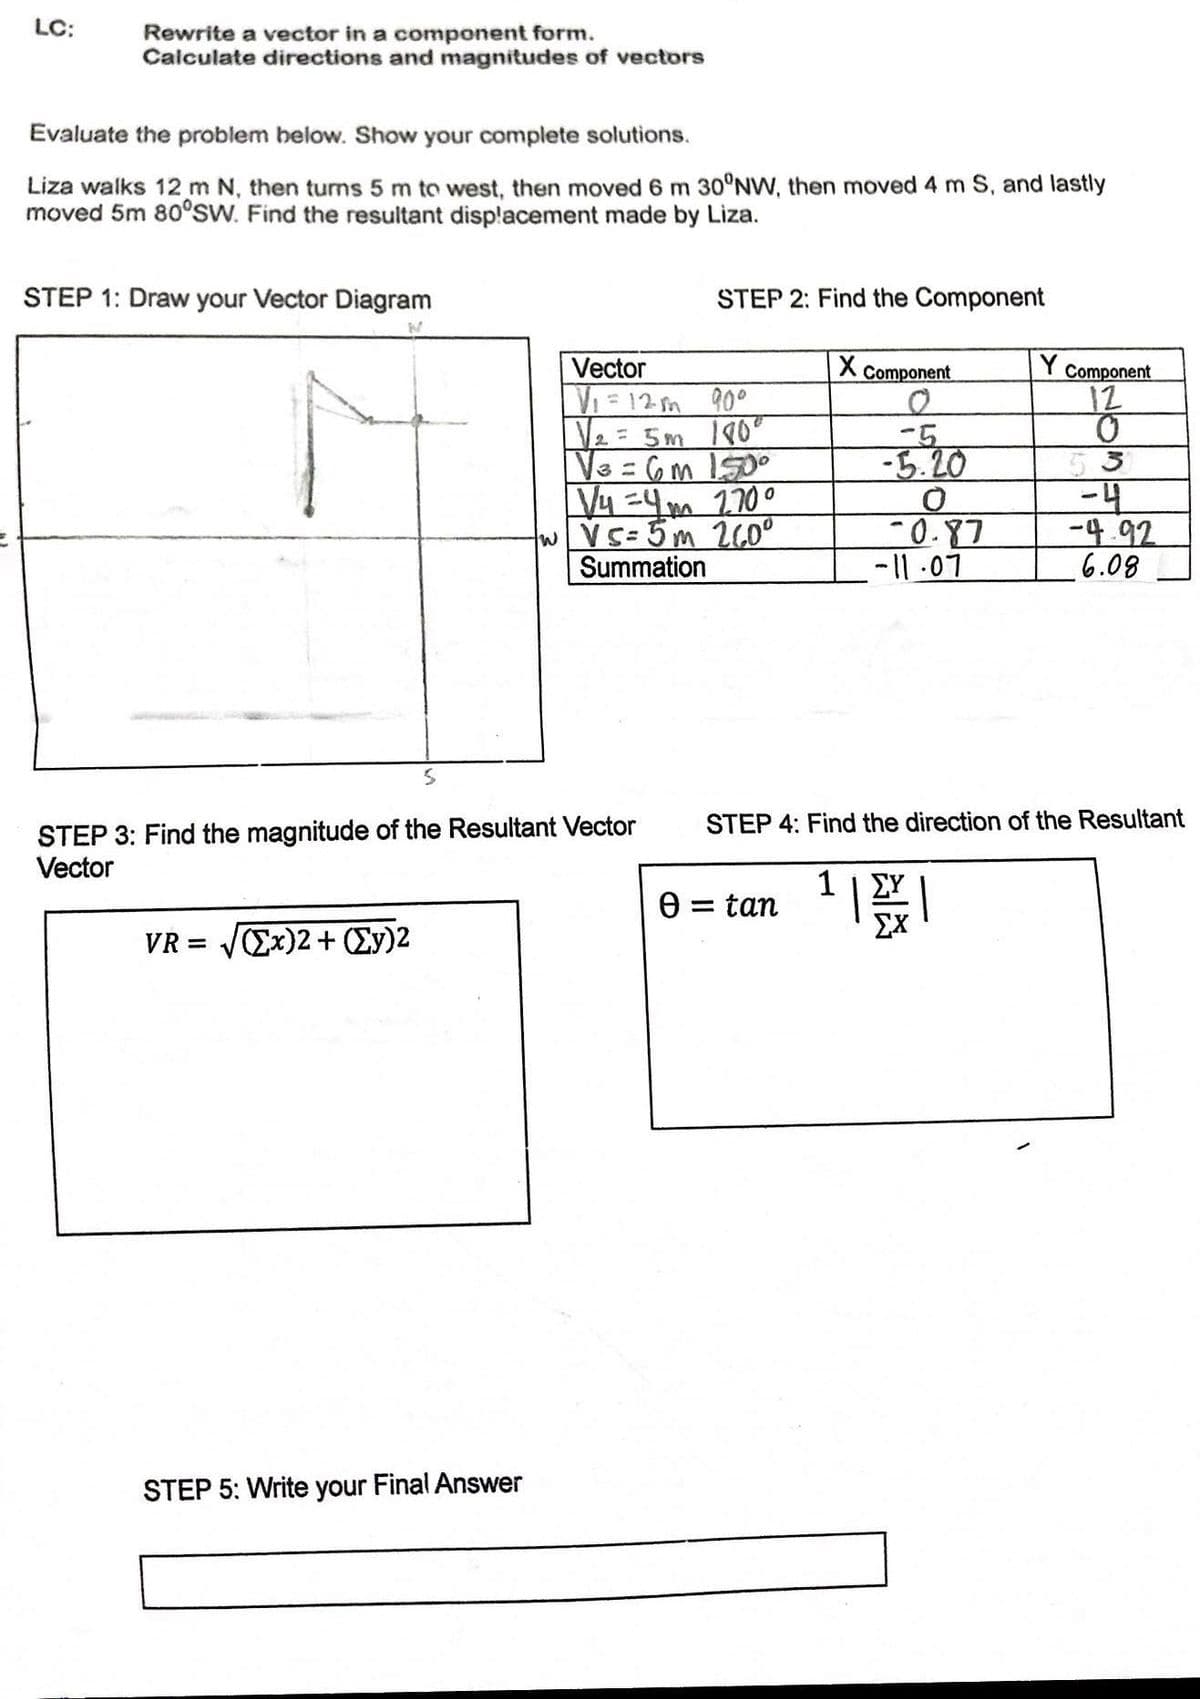 LC:
Rewrite a vector in a component form.
Calculate directions and magnitudes of vectors
Evaluate the problem below. Show your complete solutions.
Liza walks 12 m N, then turns 5 m to west, then moved 6 m 30°NW, then moved 4 m S, and lastly
moved 5m 80°SW. Find the resultant displacement made by Liza.
STEP 1: Draw your Vector Diagram
STEP 3: Find the magnitude of the Resultant Vector
Vector
VR= (Σχ)2 + (Σy)2
STEP 5: Write your Final Answer
STEP 2: Find the Component
Vector
V₁ =12m 90°
√₂ = 5m 180°
V³ = 6m 150°
√/4 = 4m 270°
tw| Vs=5m 260⁰
Summation
X
0 = tan
Component
-5
-5.20
-0.87
-11.07
Y
Component
12
3
-4
-4.92
6.08
STEP 4: Find the direction of the Resultant
1
1 | ΣΥ
ΣΧ